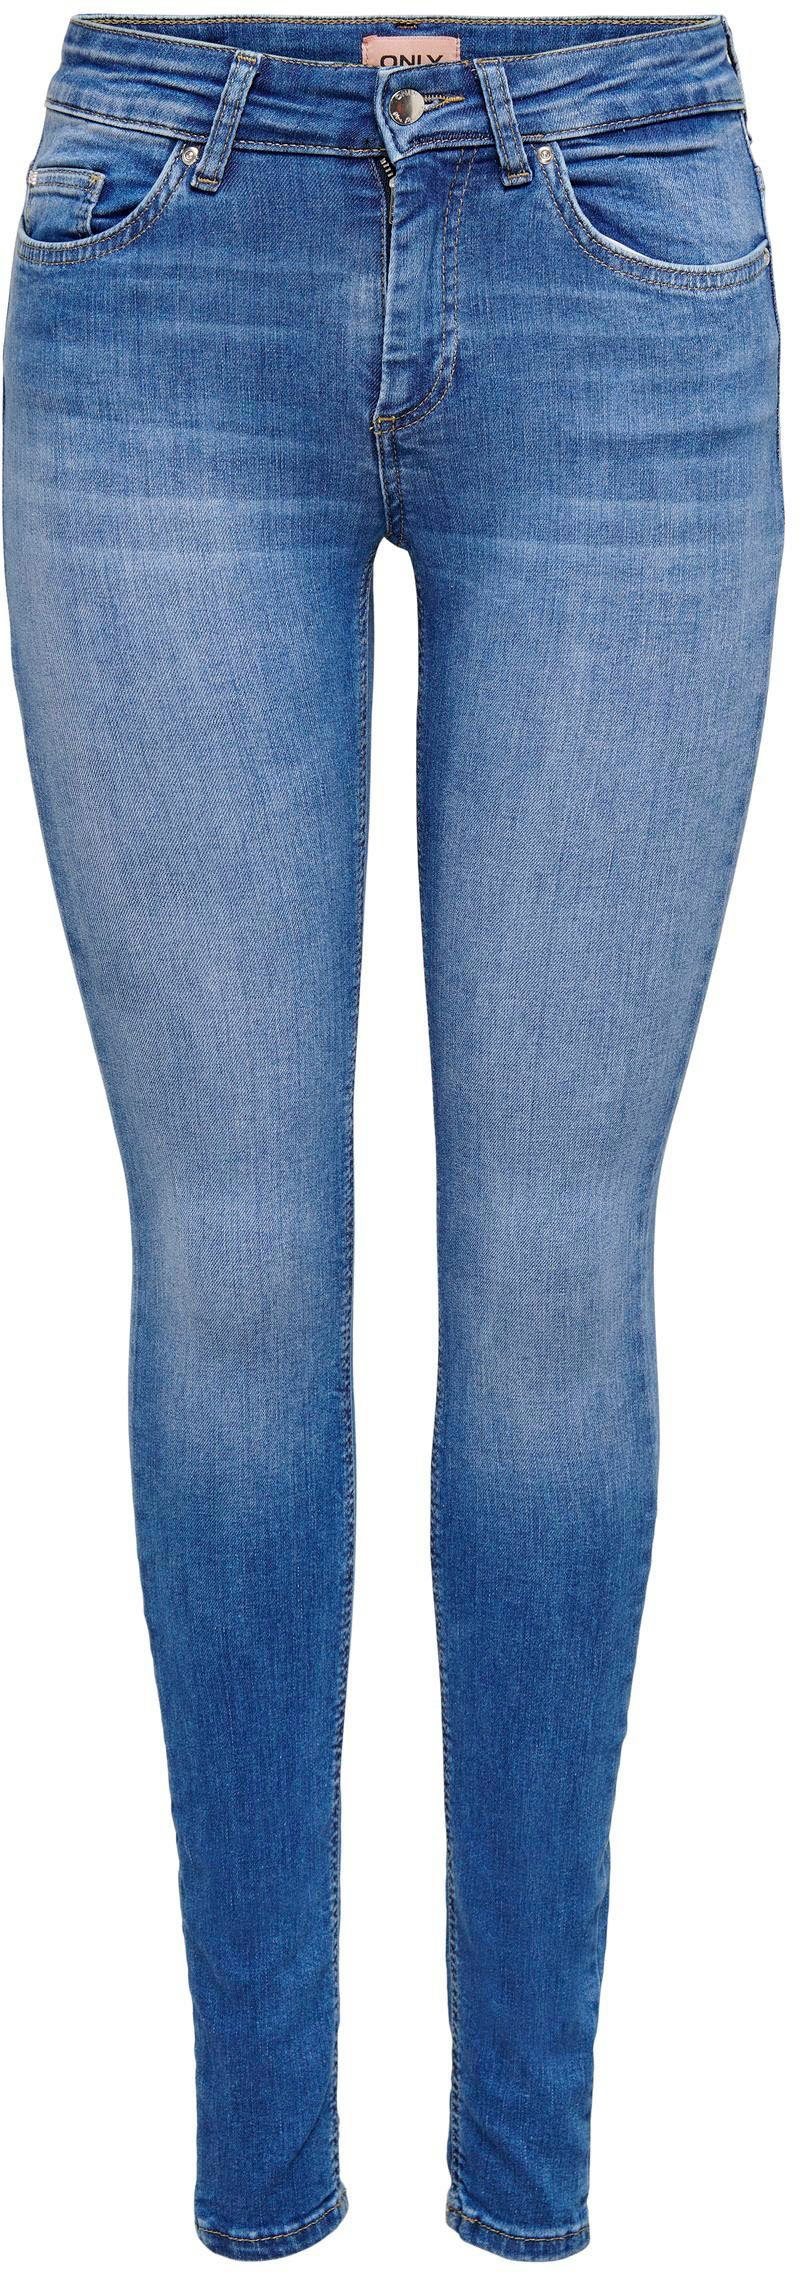 Damen Jeans Only Skinny-fit-Jeans ONLBLUSH LIFE